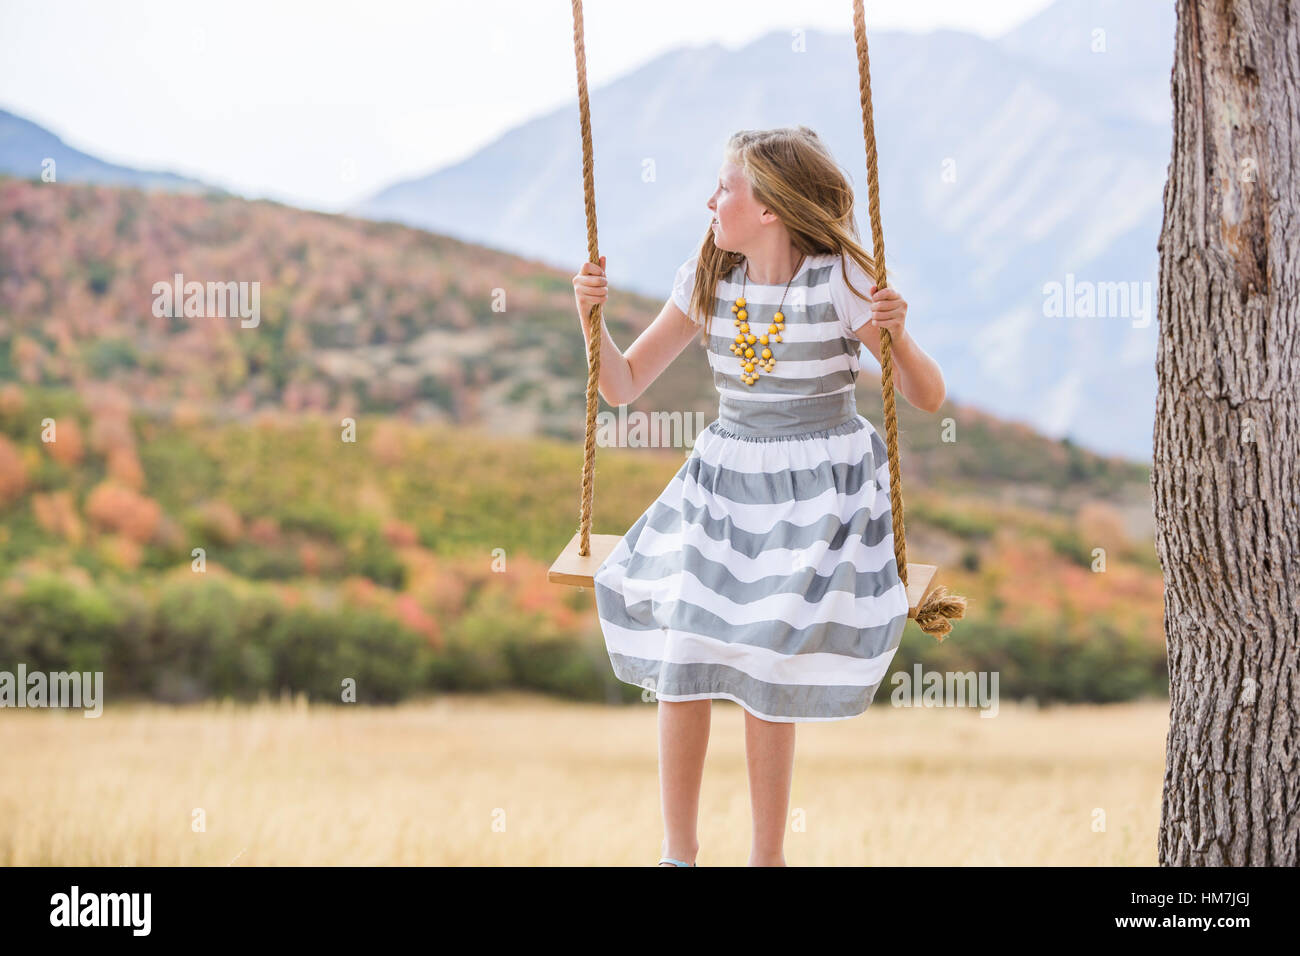 Girl (8-9) sitting on swing Banque D'Images